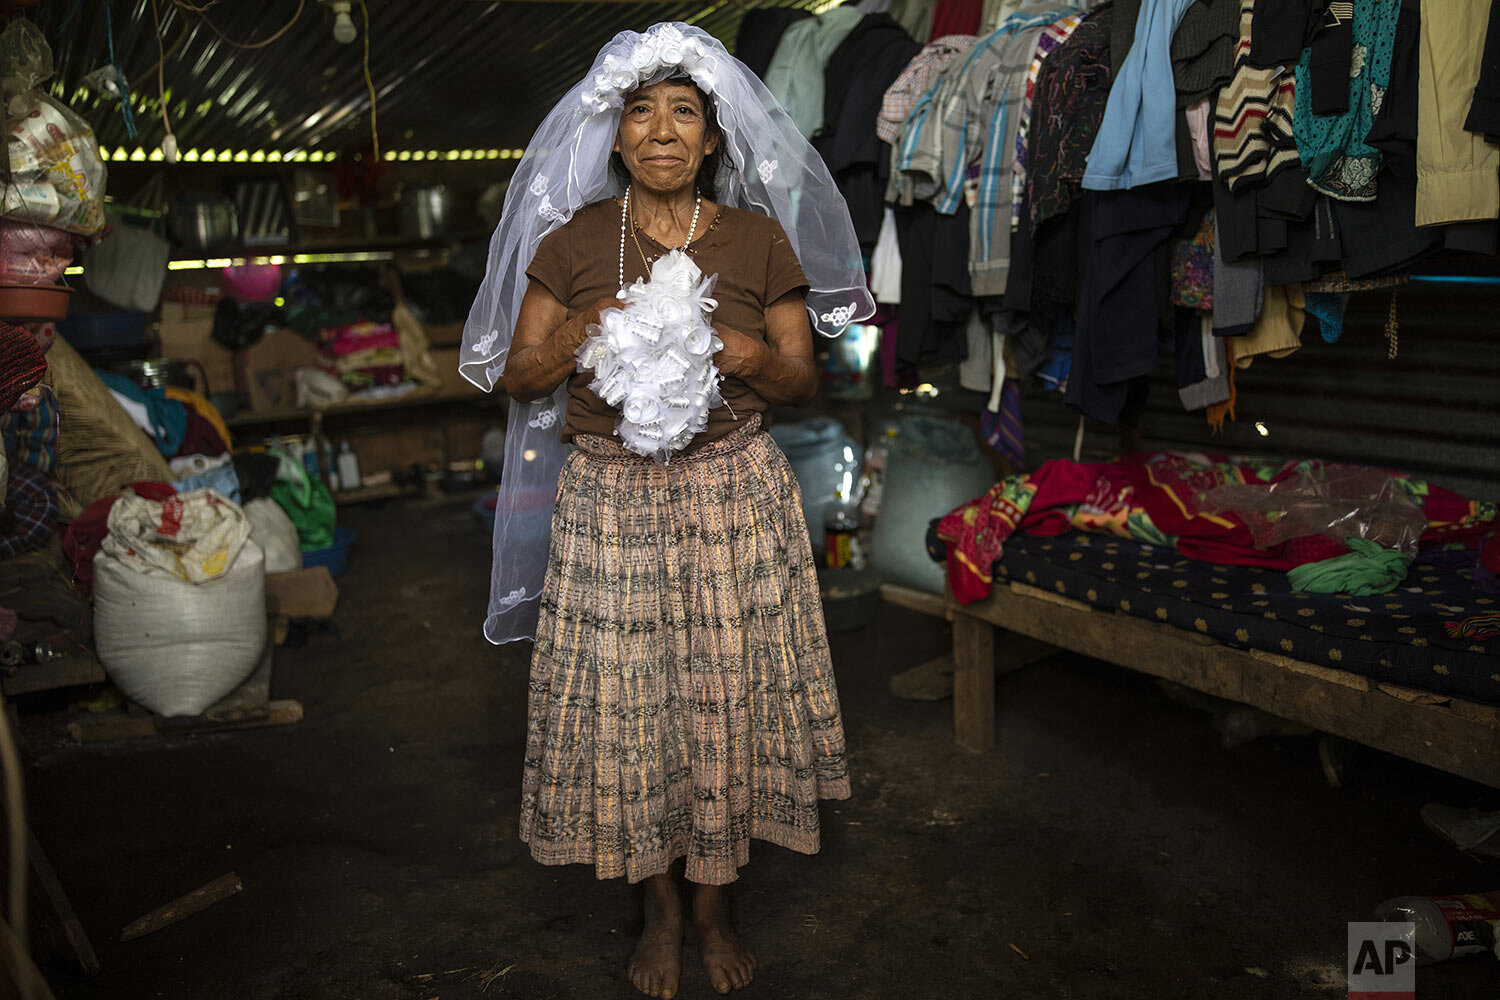  Rosario Cal poses for a photo wearing her veil and holding her bouquet, as she recalls her wedding day from this past May, in the new settlement Nuevo Queja, Guatemala, July 10, 2021. Cal is one of the survivors of a mudslide triggered by Hurricane 